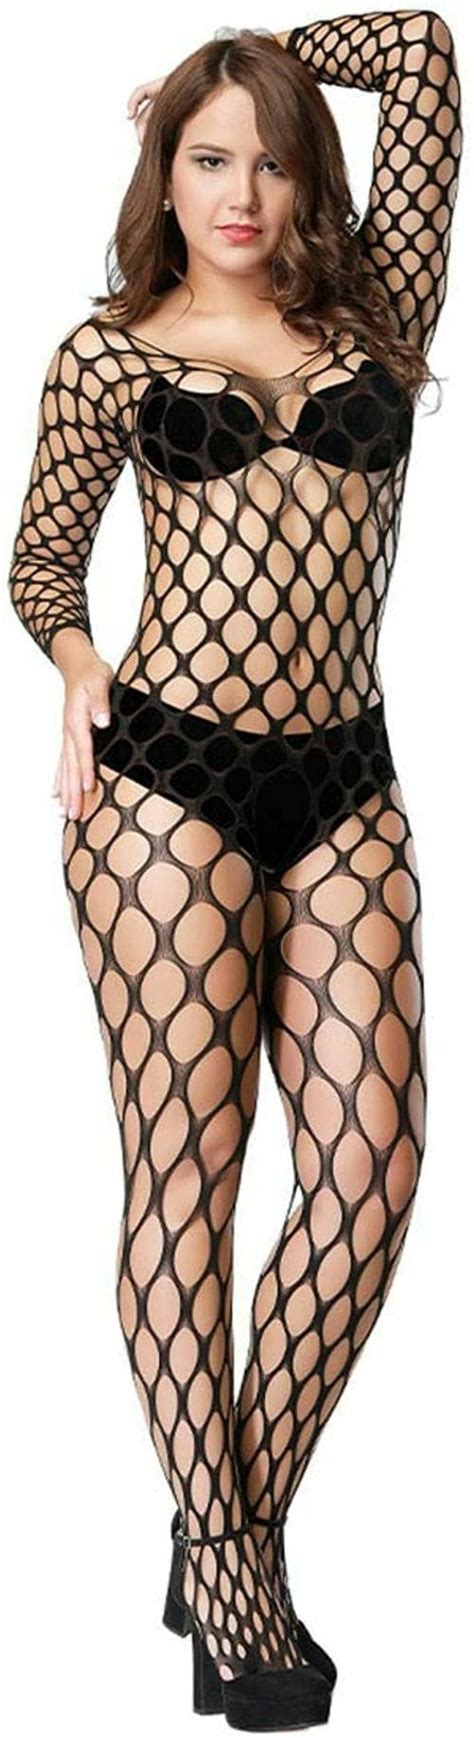 Ogimi Ohh Give Me Women Fishnet Hollow Cut Out Body Stocking Jiomart